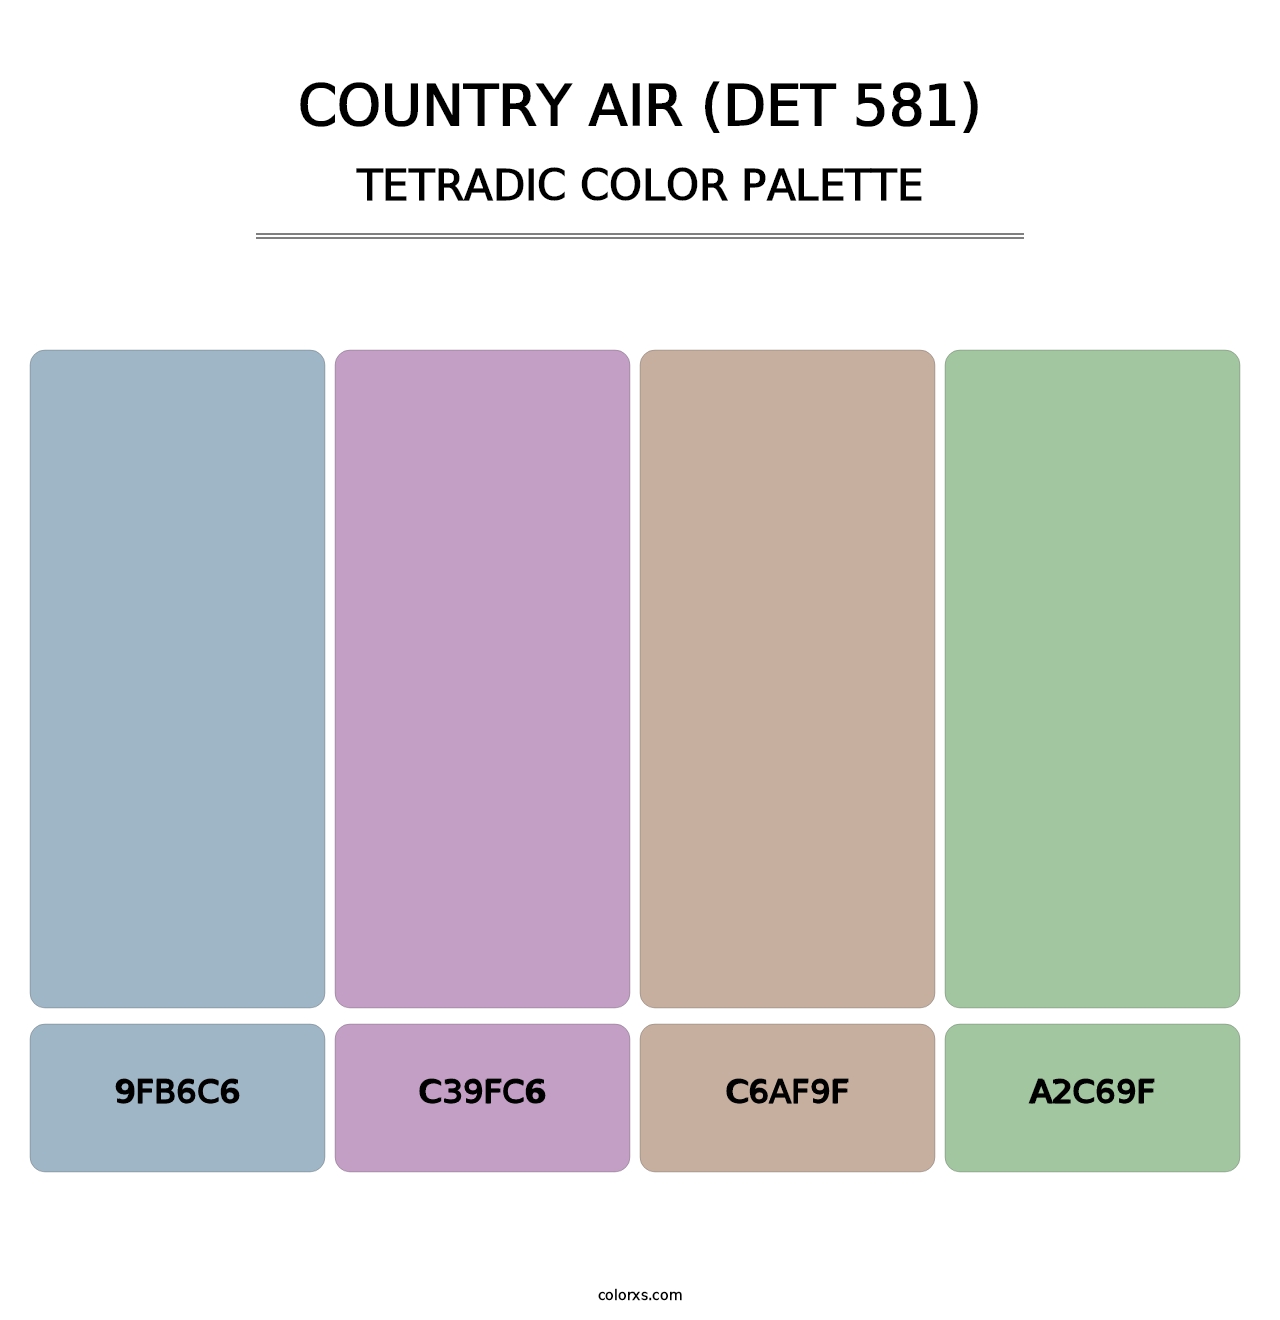 Country Air (DET 581) - Tetradic Color Palette